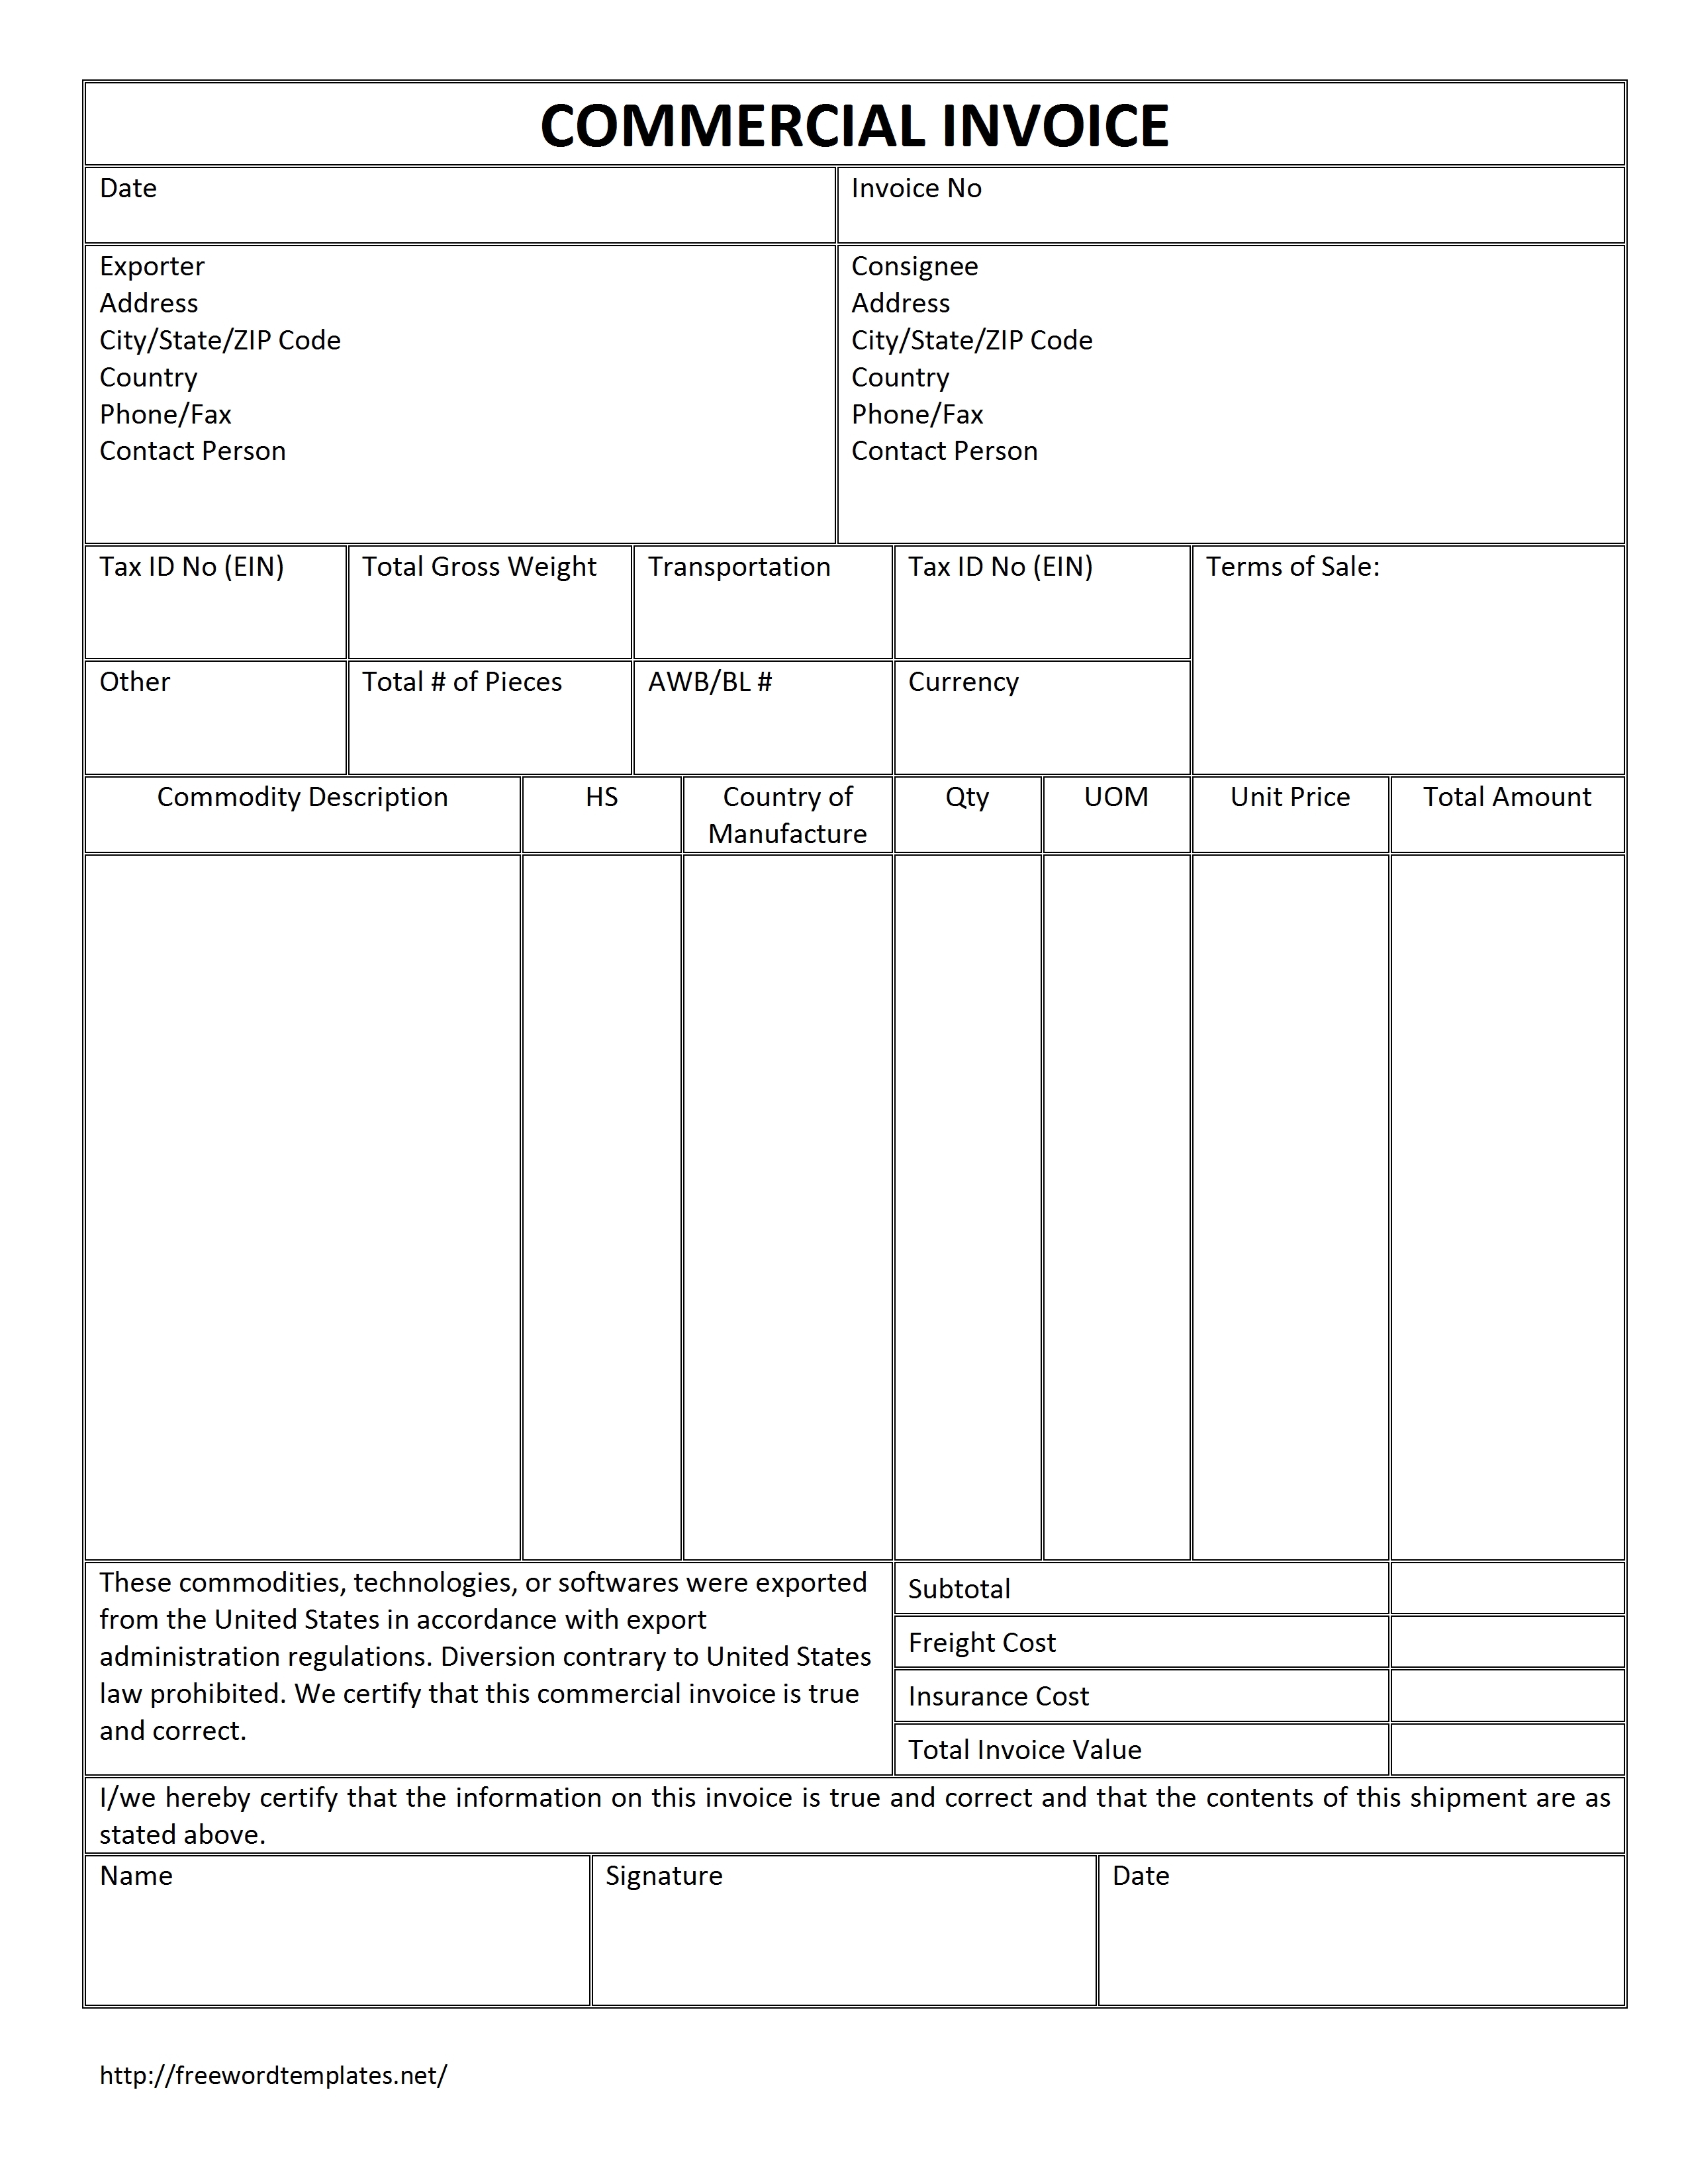 commercial invoice 2015 thedigimed blank commercial invoice pdf